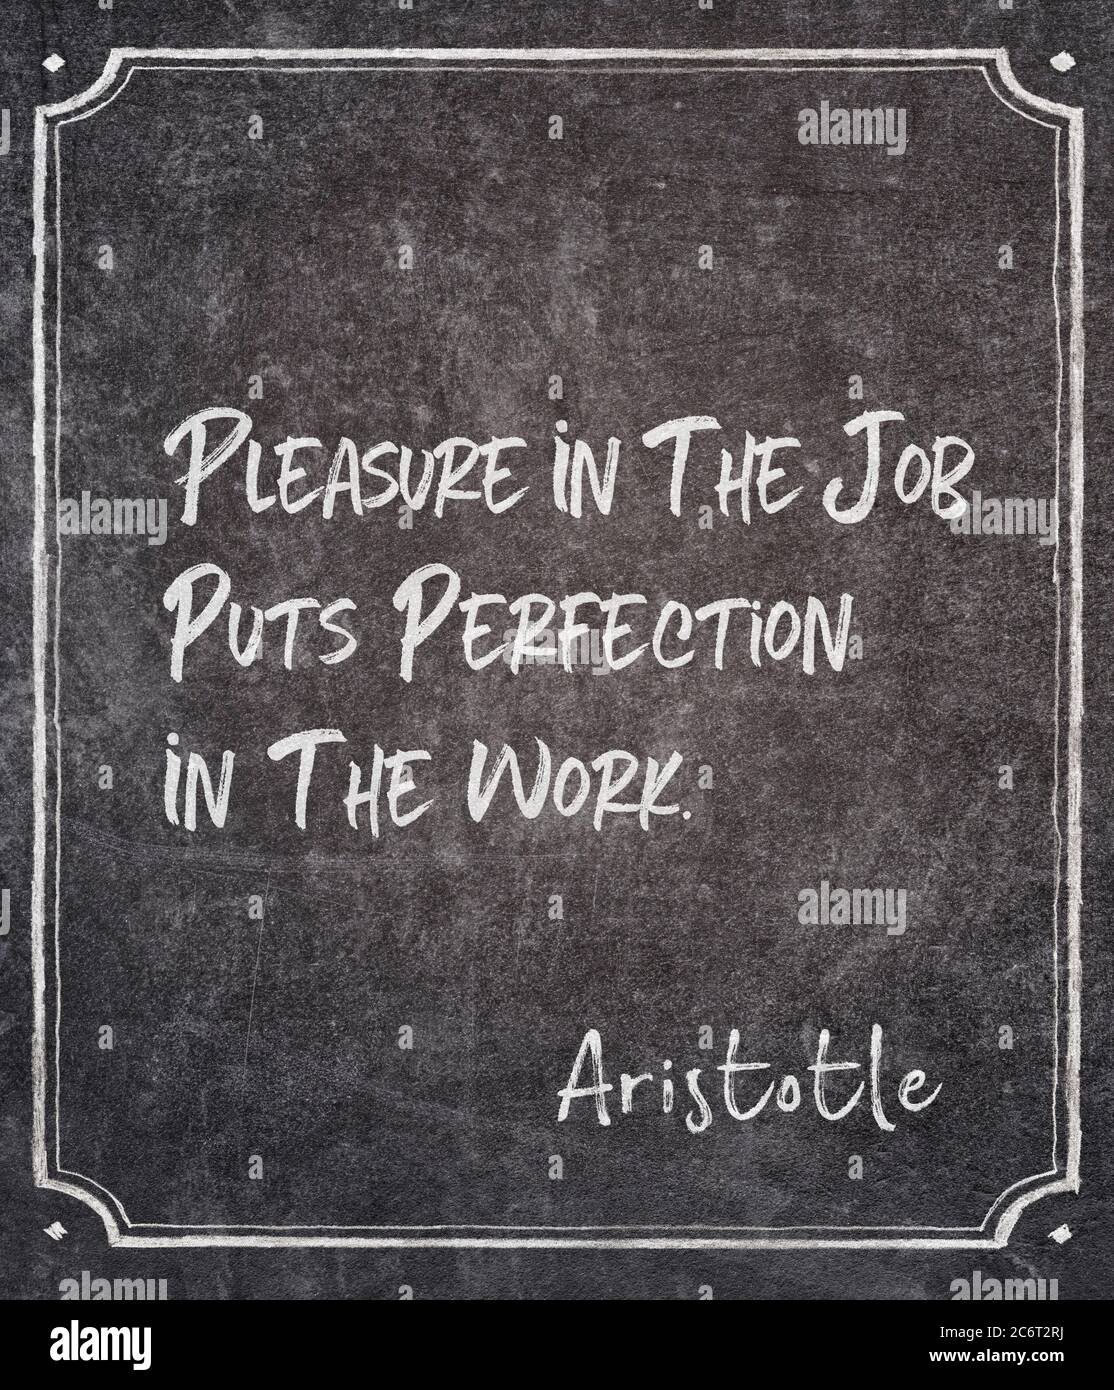 Pleasure in the job puts perfection in the work - ancient Greek philosopher Aristotle quote written on framed chalkboard Stock Photo